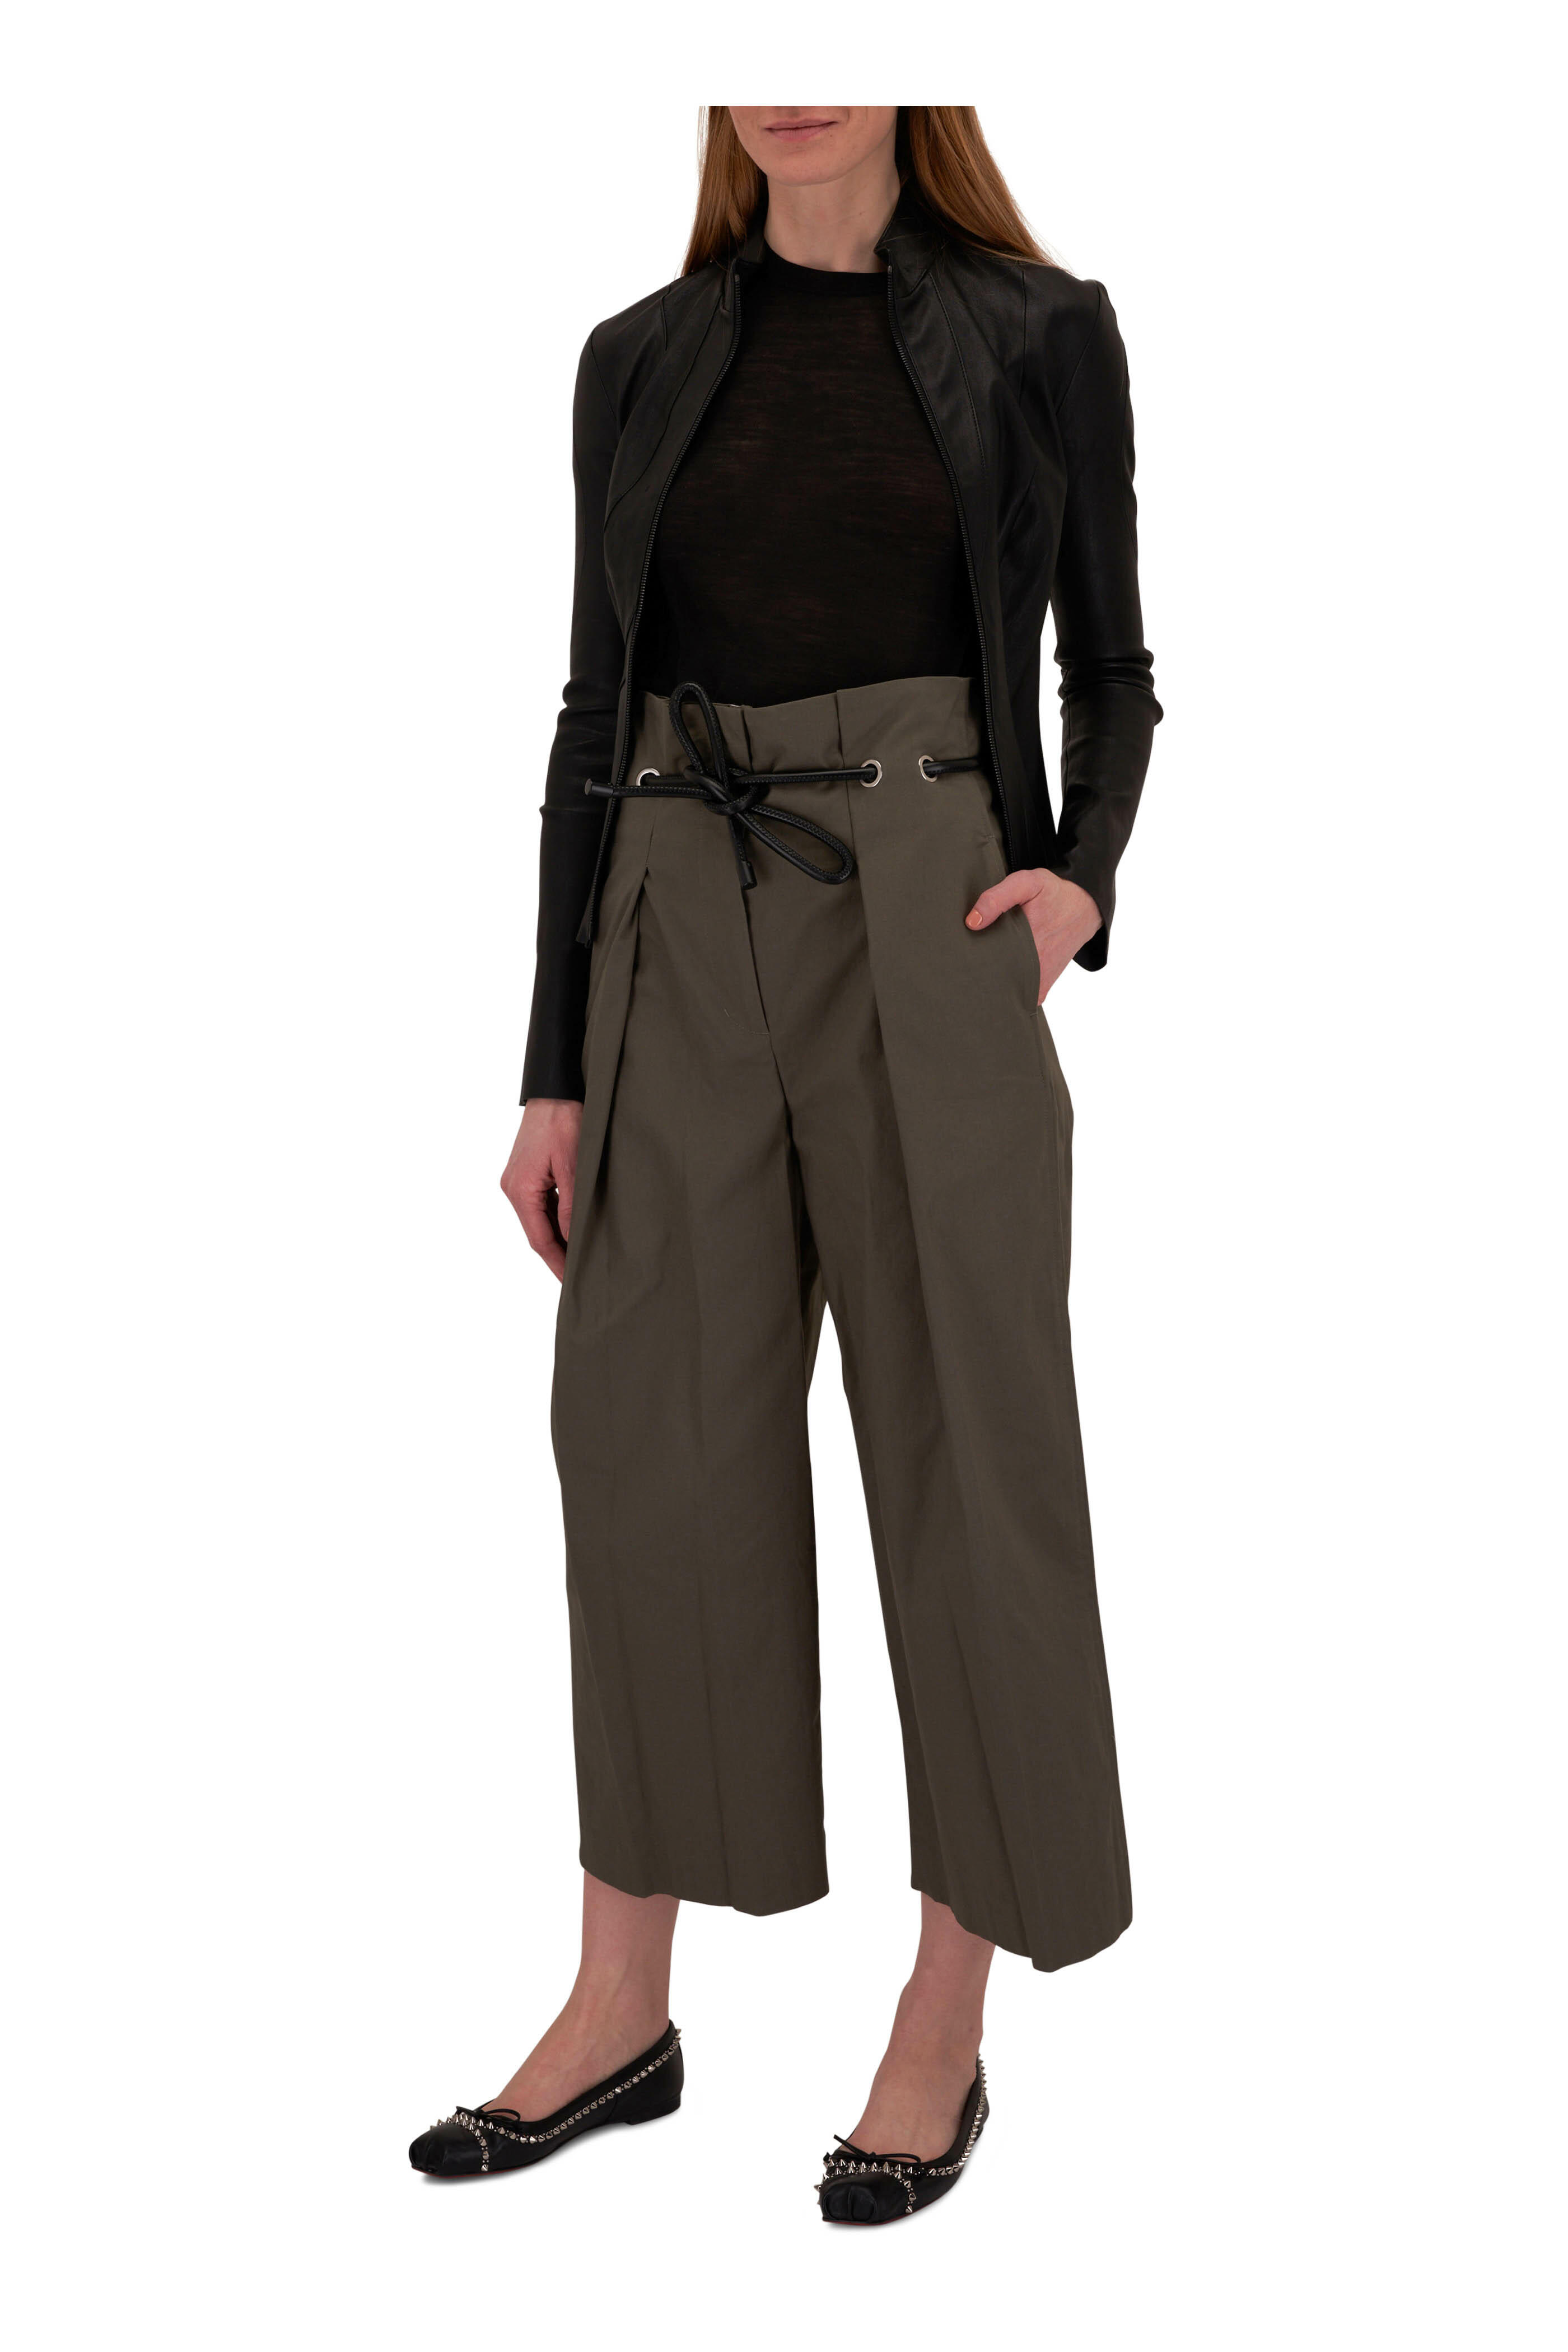 3.1 Phillip Lim - Origami Army Green Cropped Wide Leg Pant